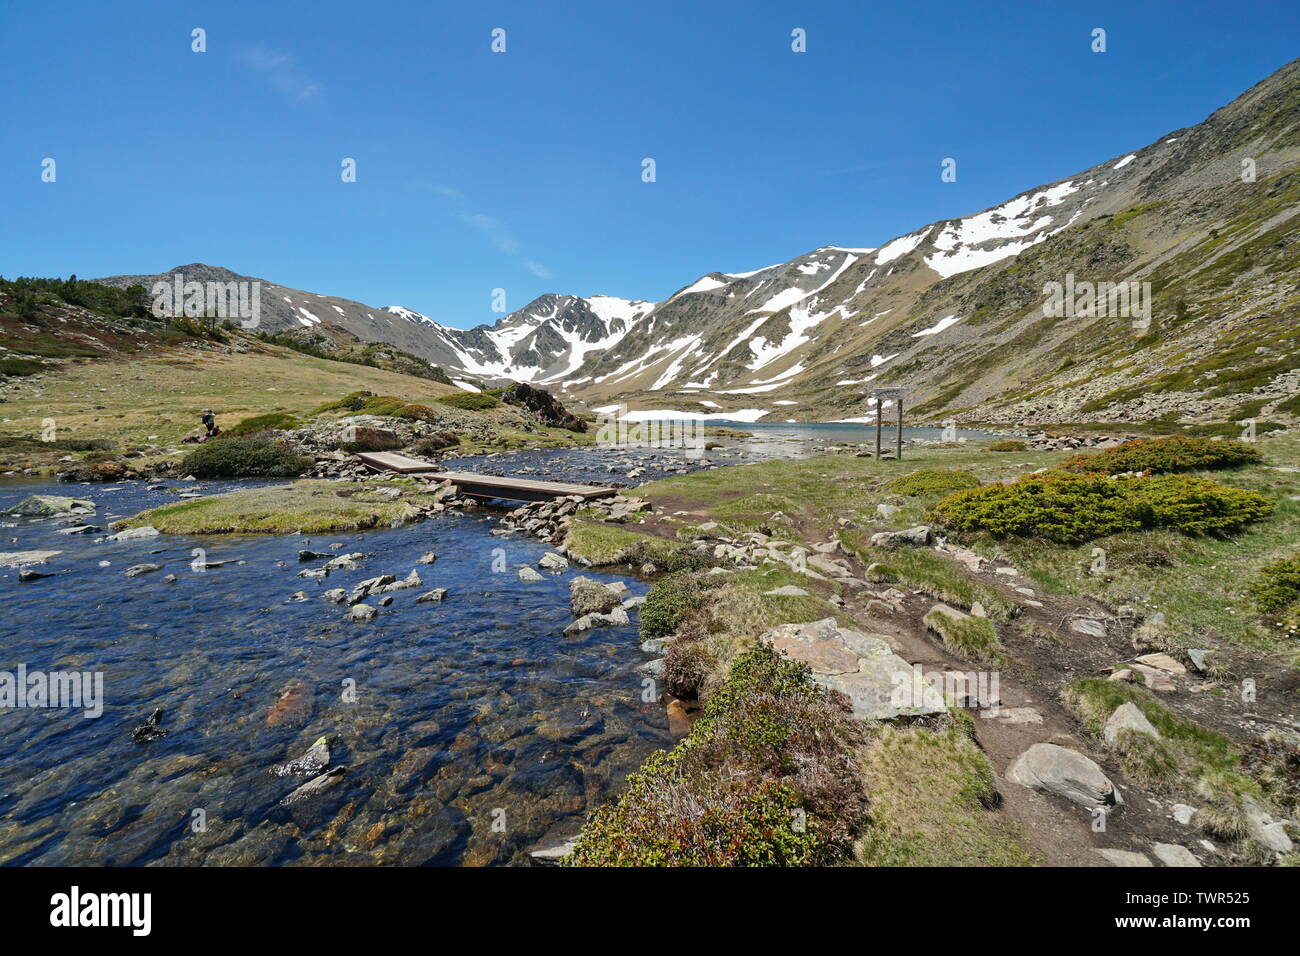 France Pyrenees mountain landscape, stream and Trebens lake with Carlit massif in background, natural park of the Catalan Pyrenees Stock Photo